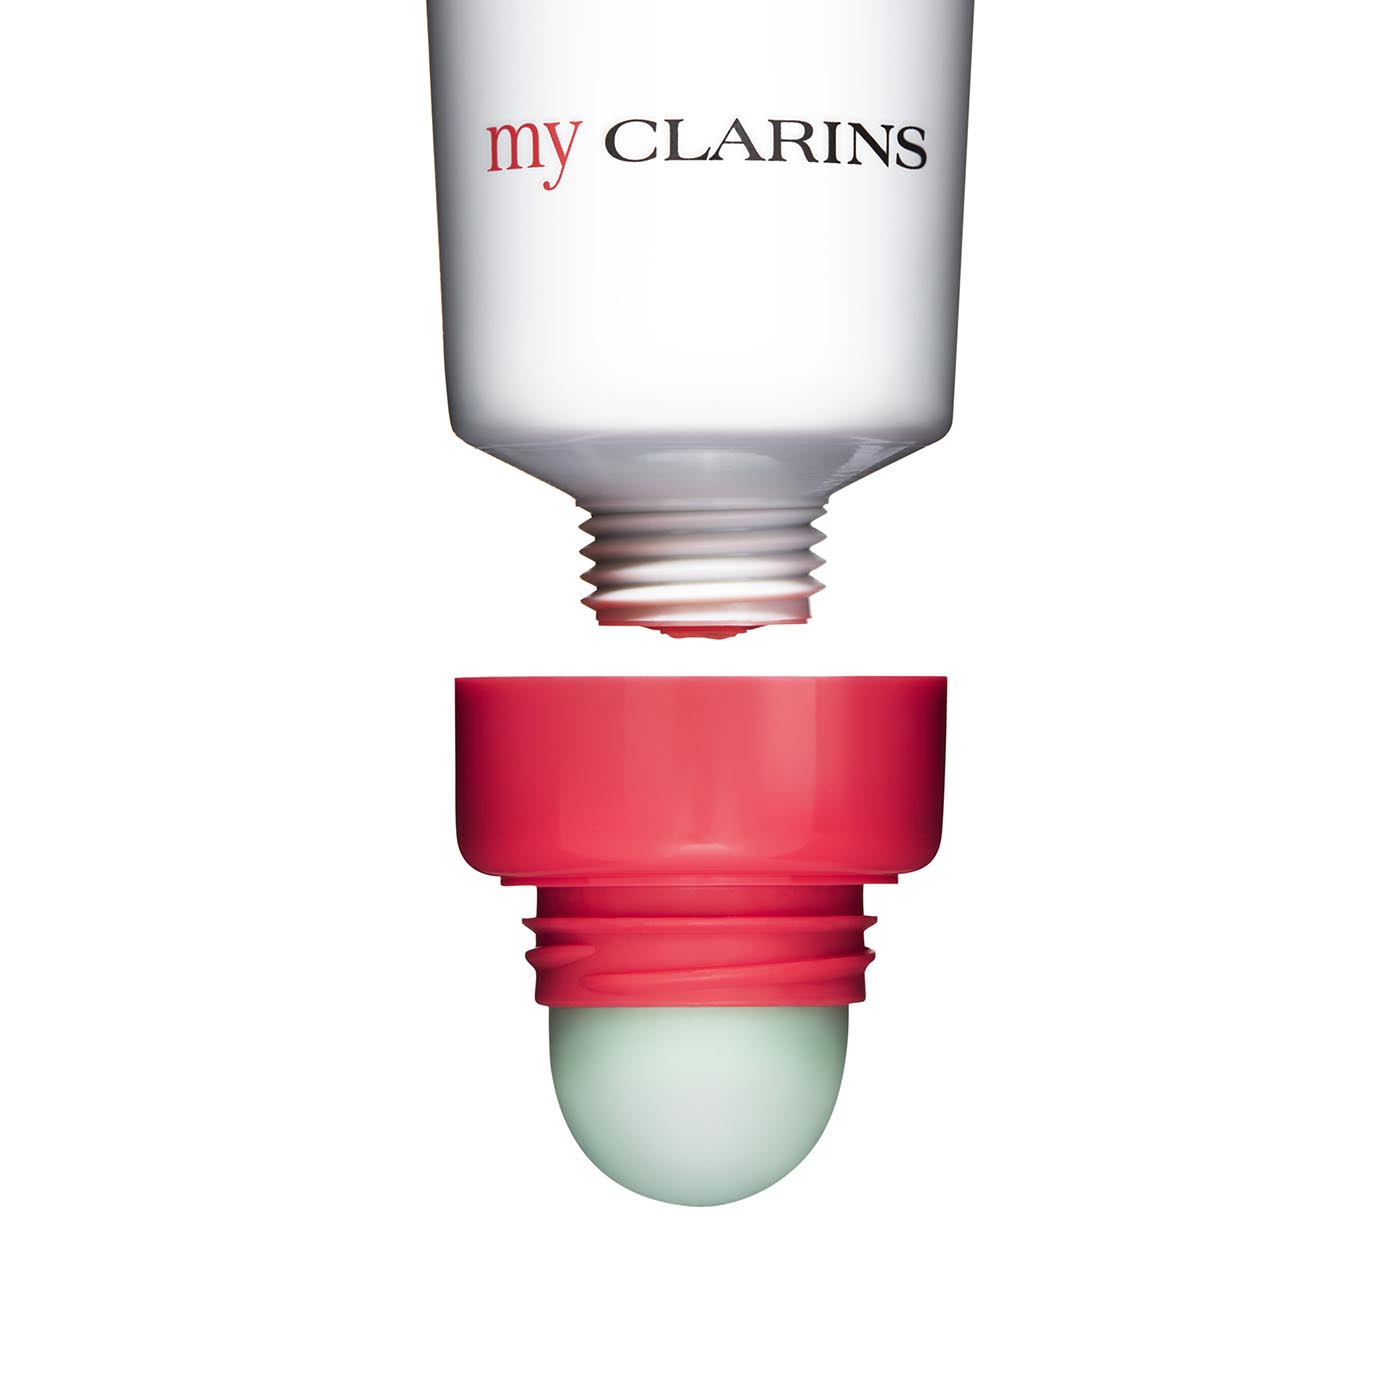 Clarins Clear-Out Mascarilla Stick Puntos Negros